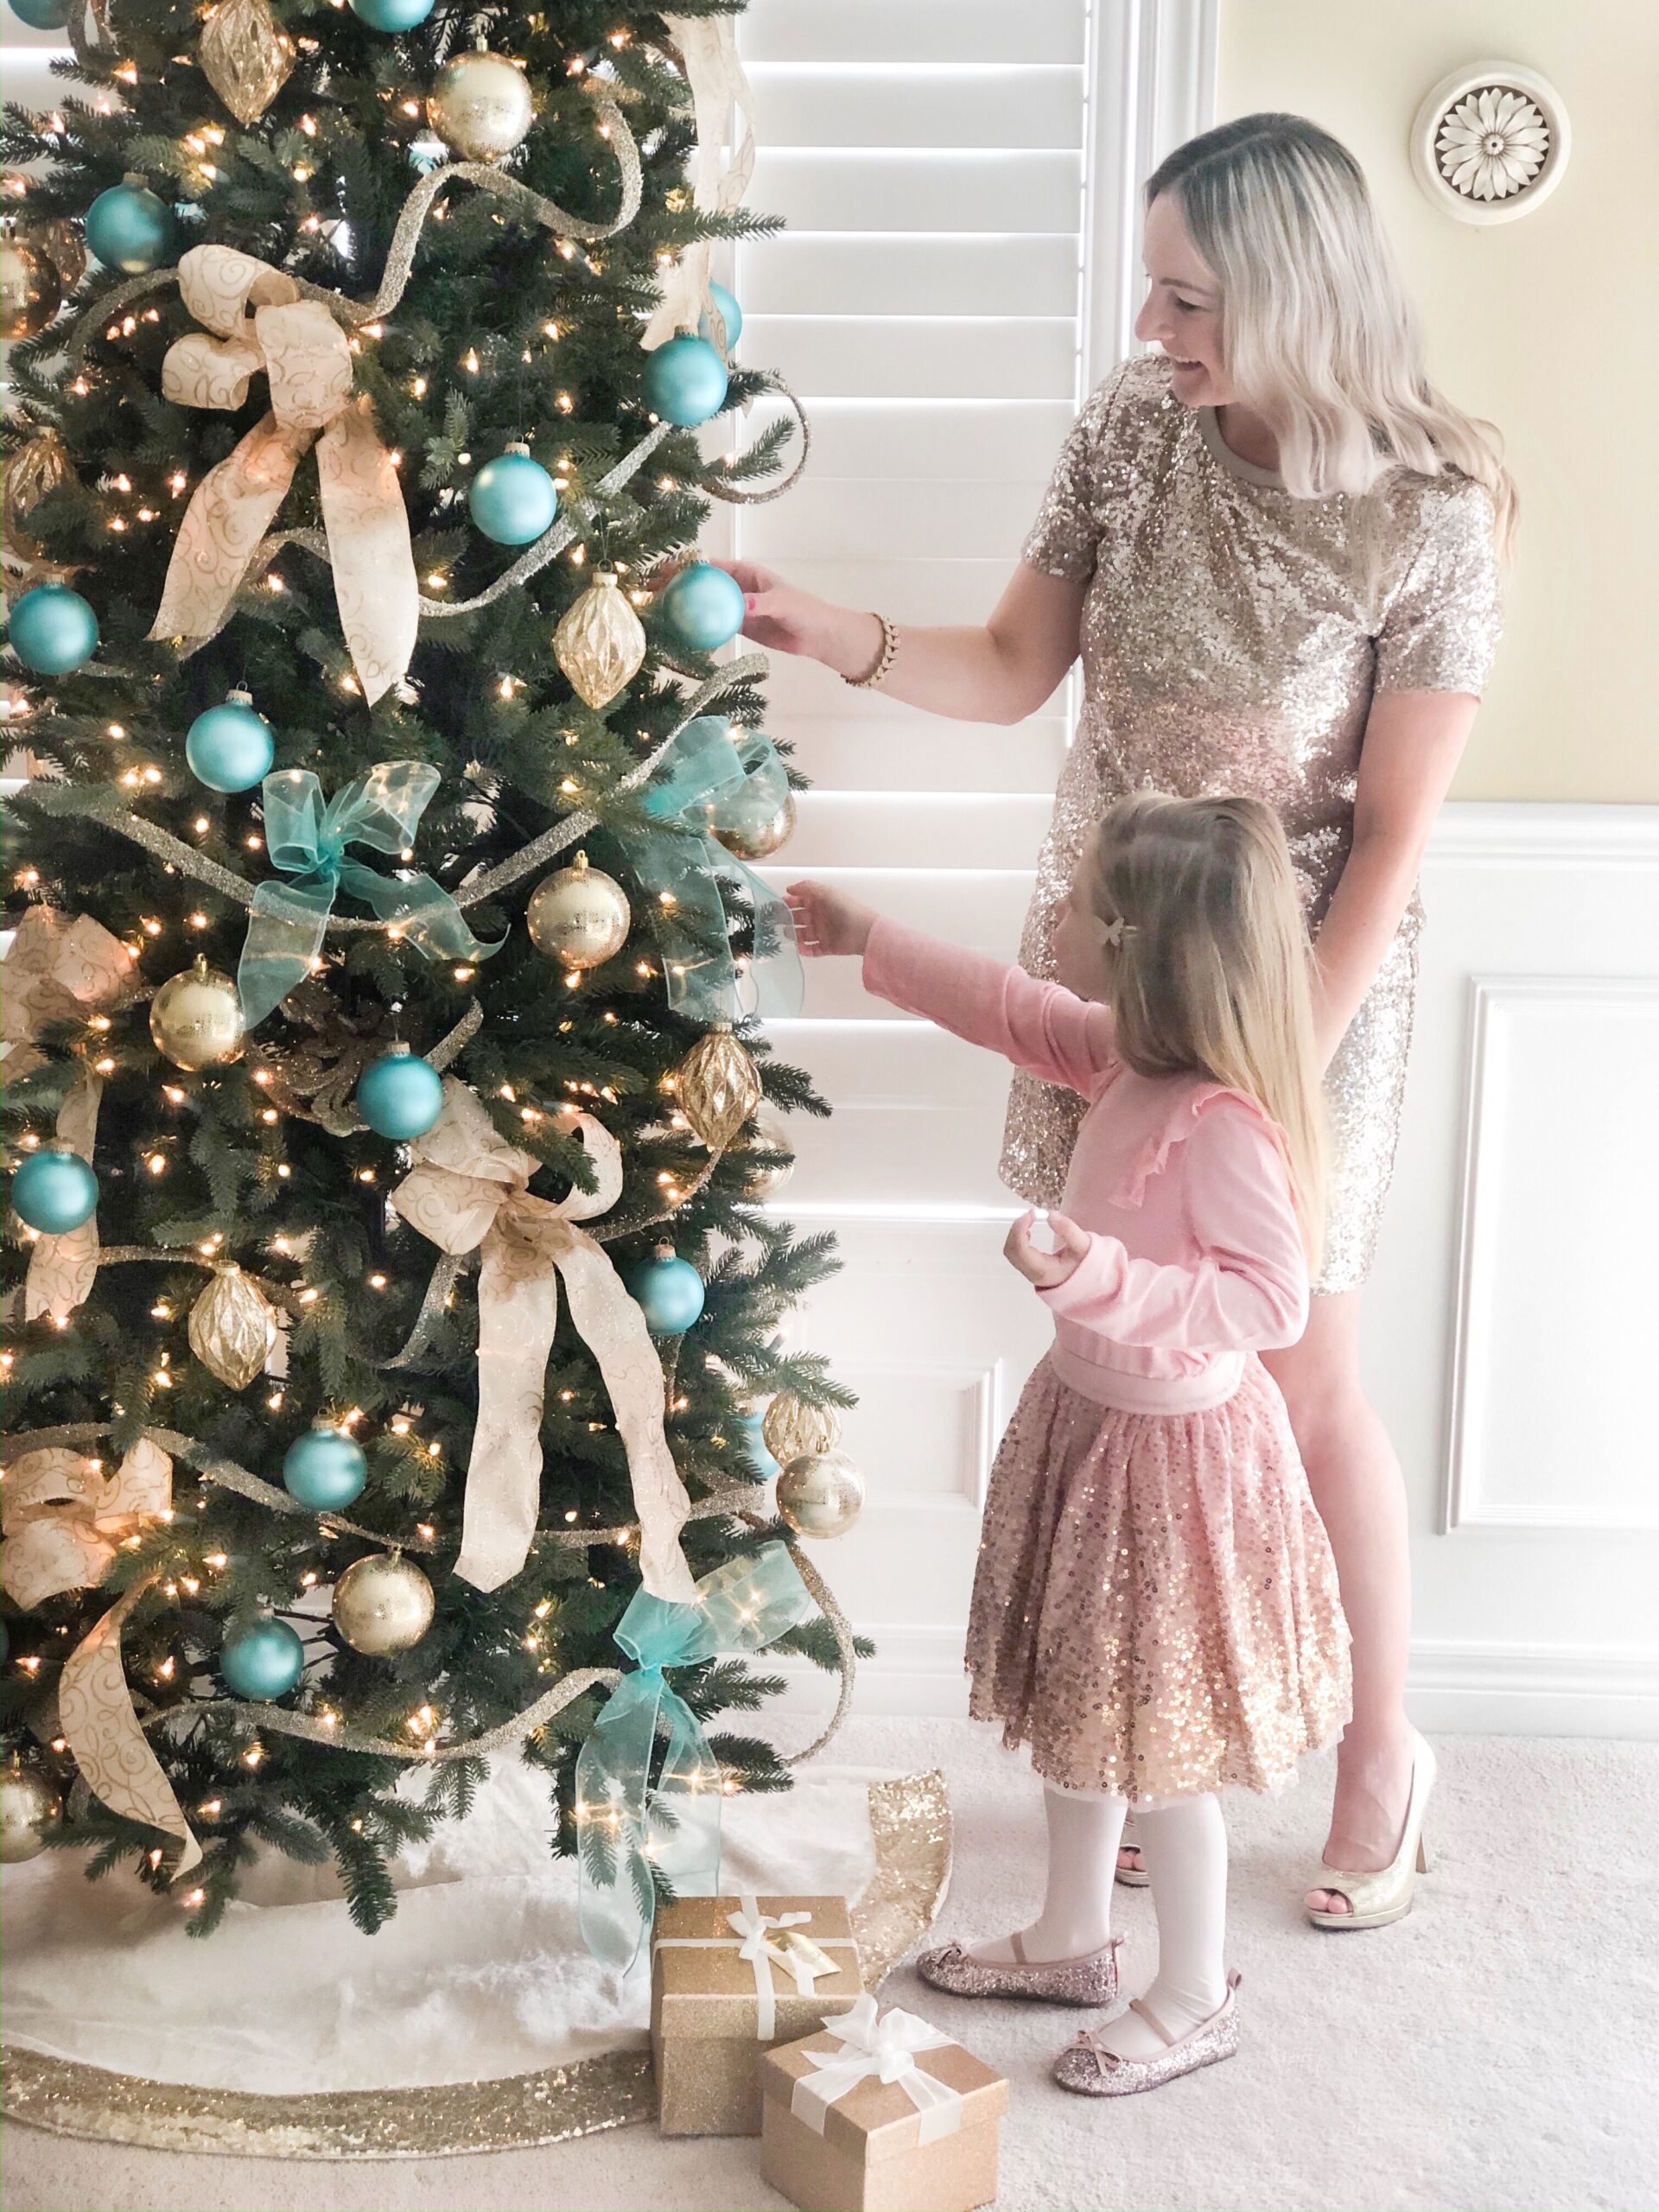 Mother and Daughter holiday looks from Joe Fresh on Livin' Life with Style